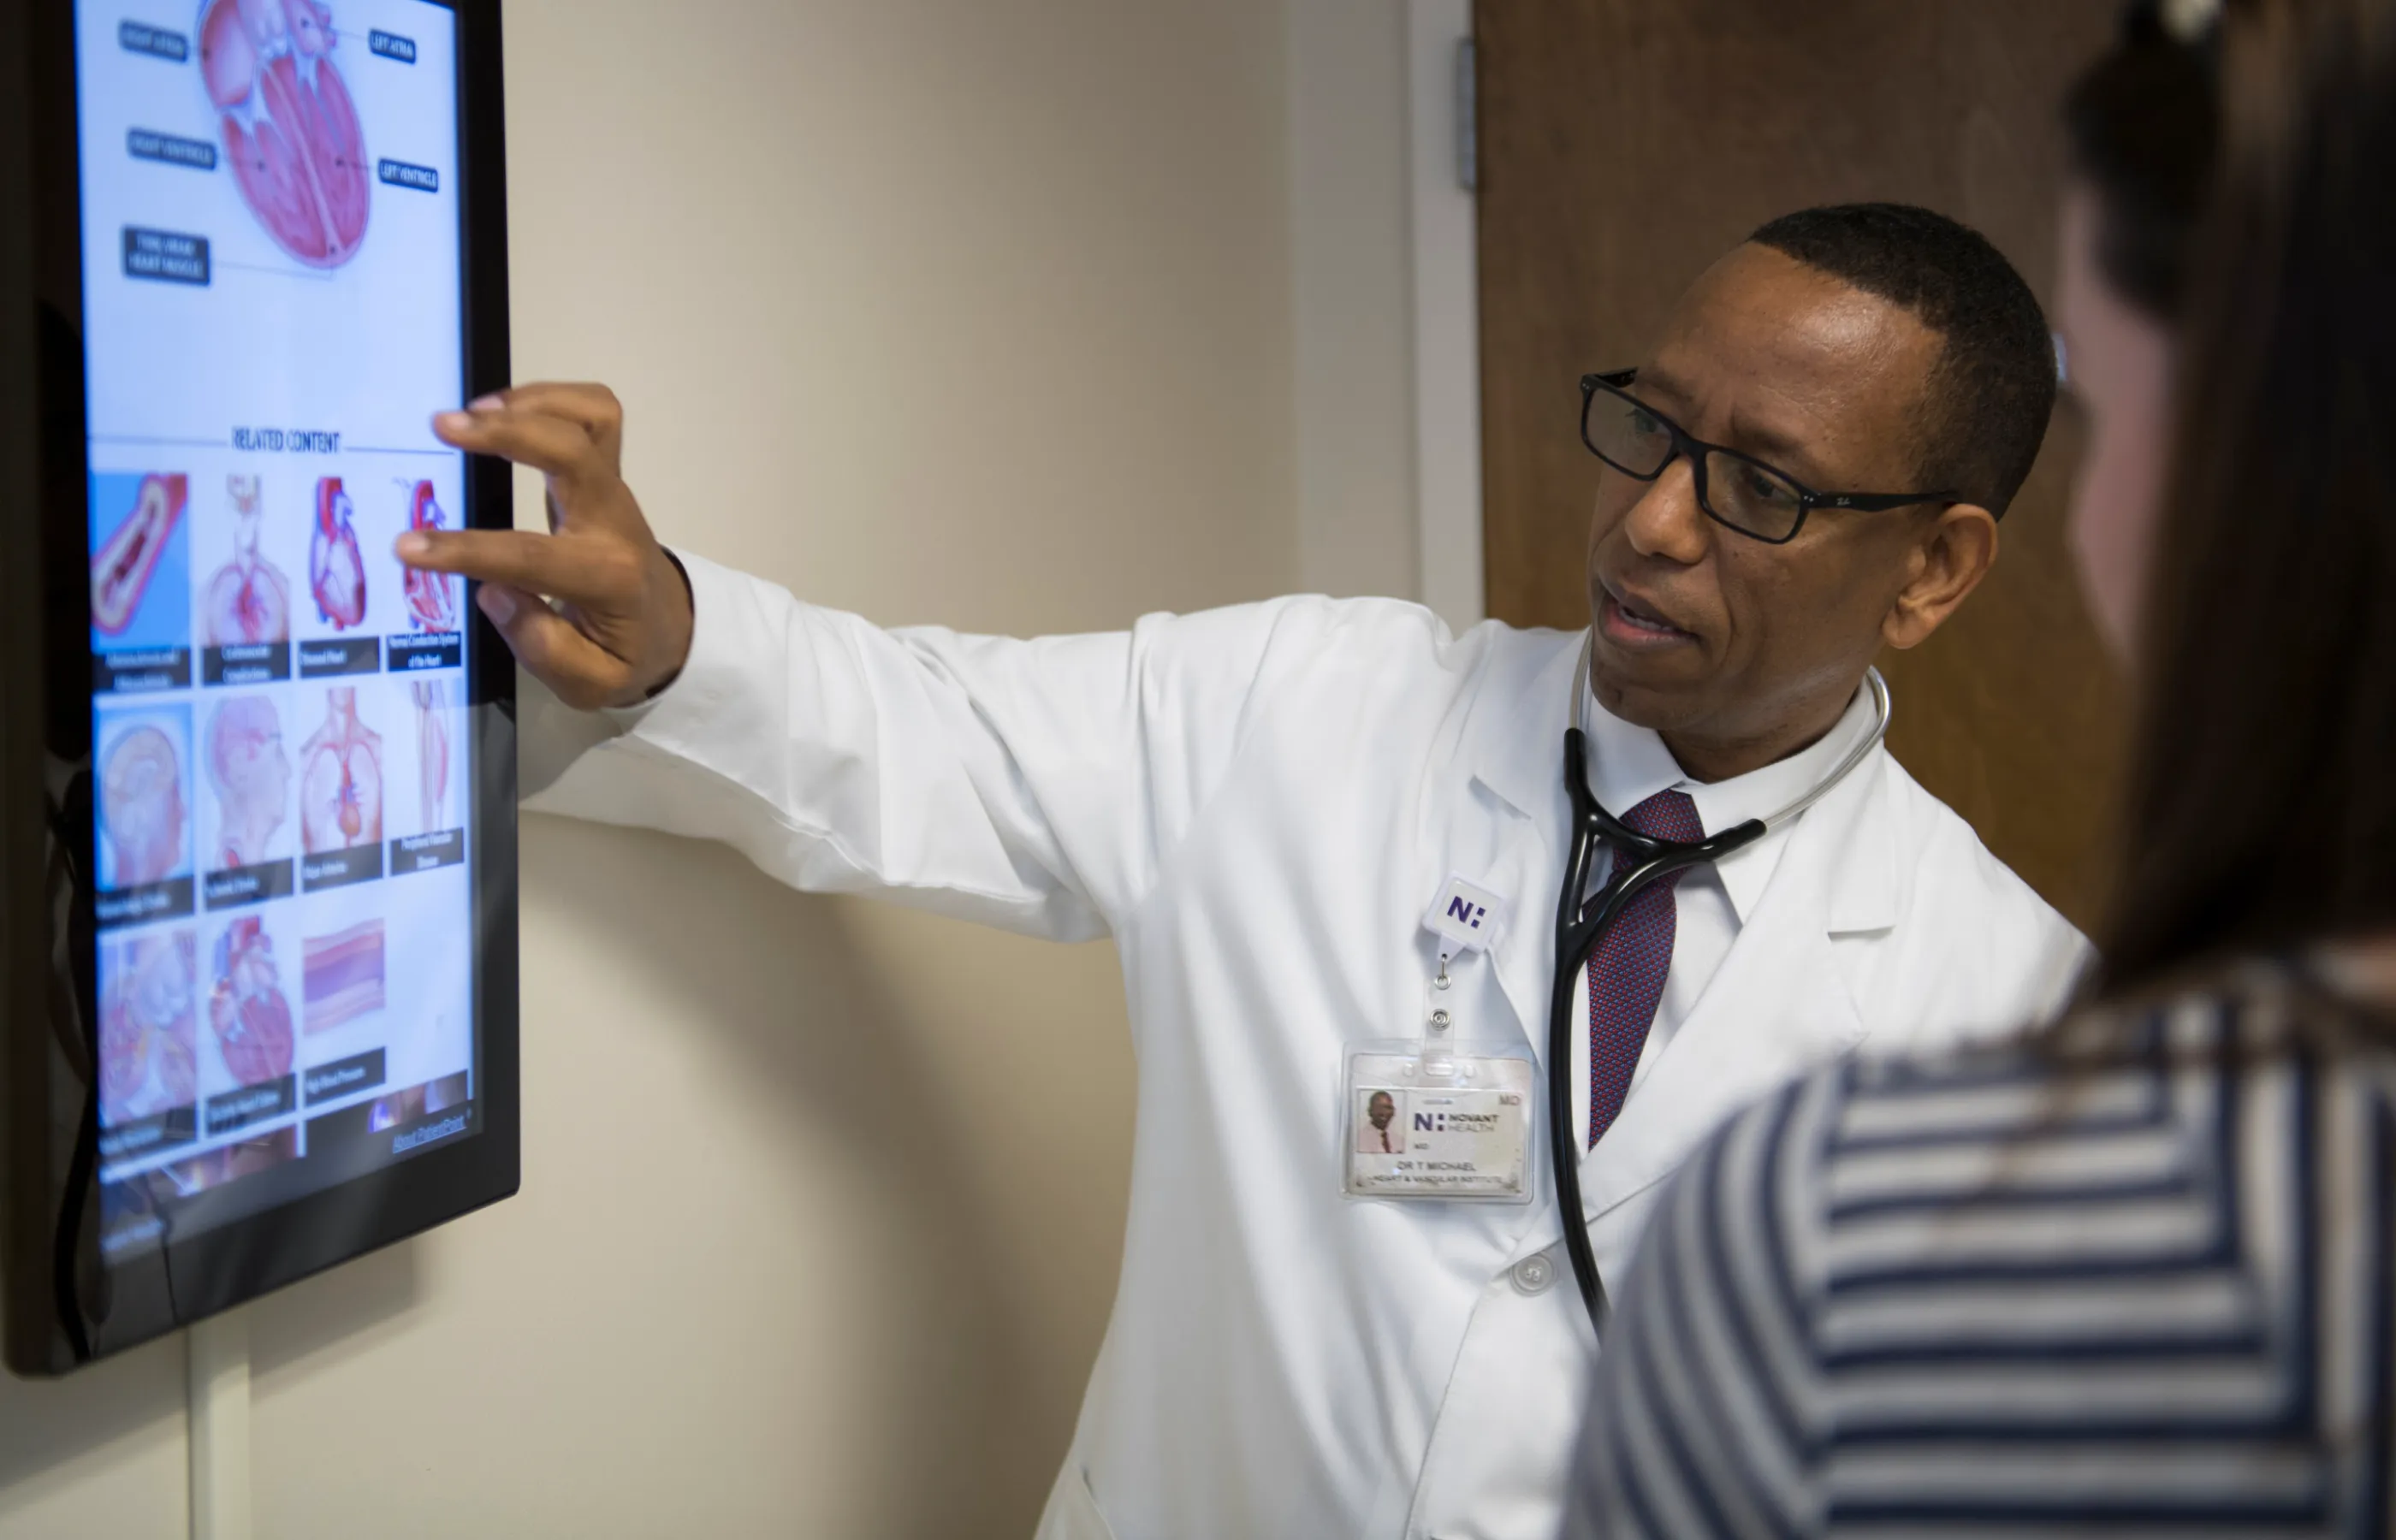 Novant Health's Dr. Michael is using a screen on a wall to display information to a patient. 